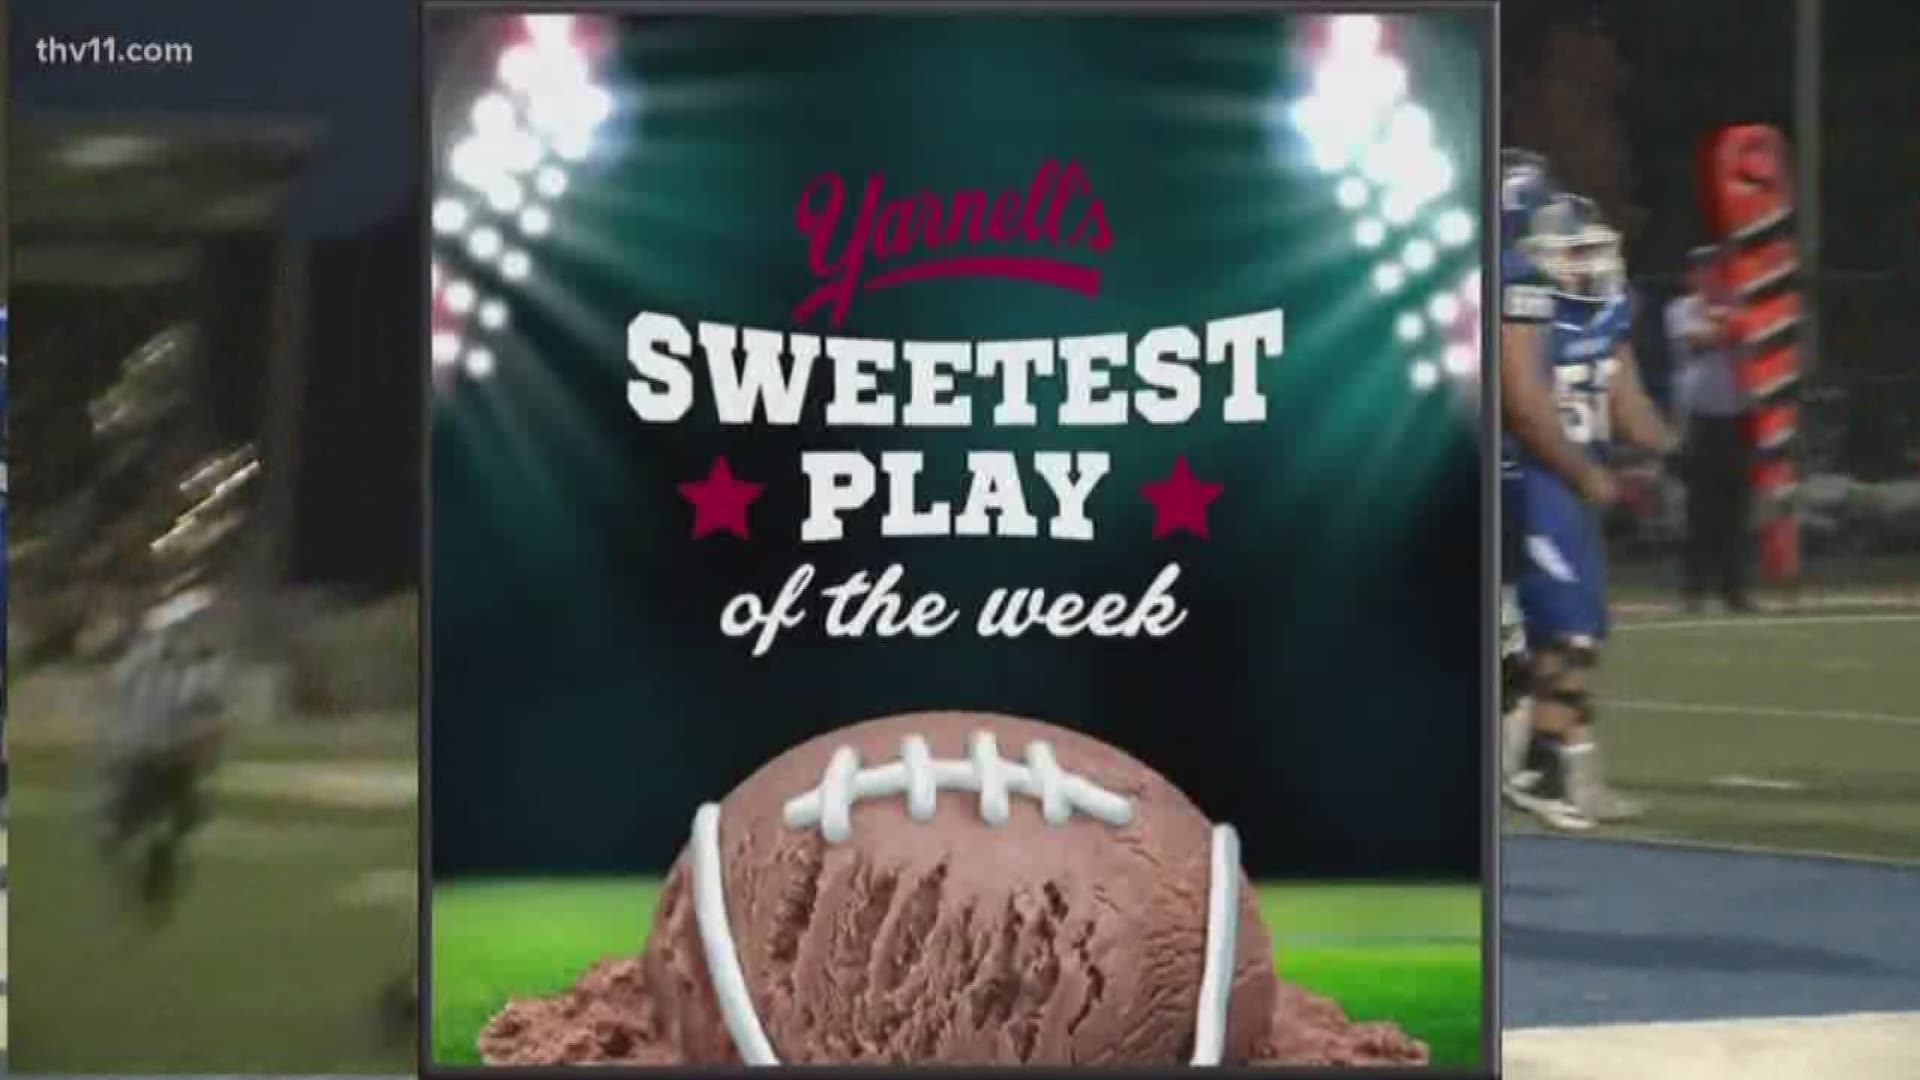 Yarnell's Sweetest Play Nominees